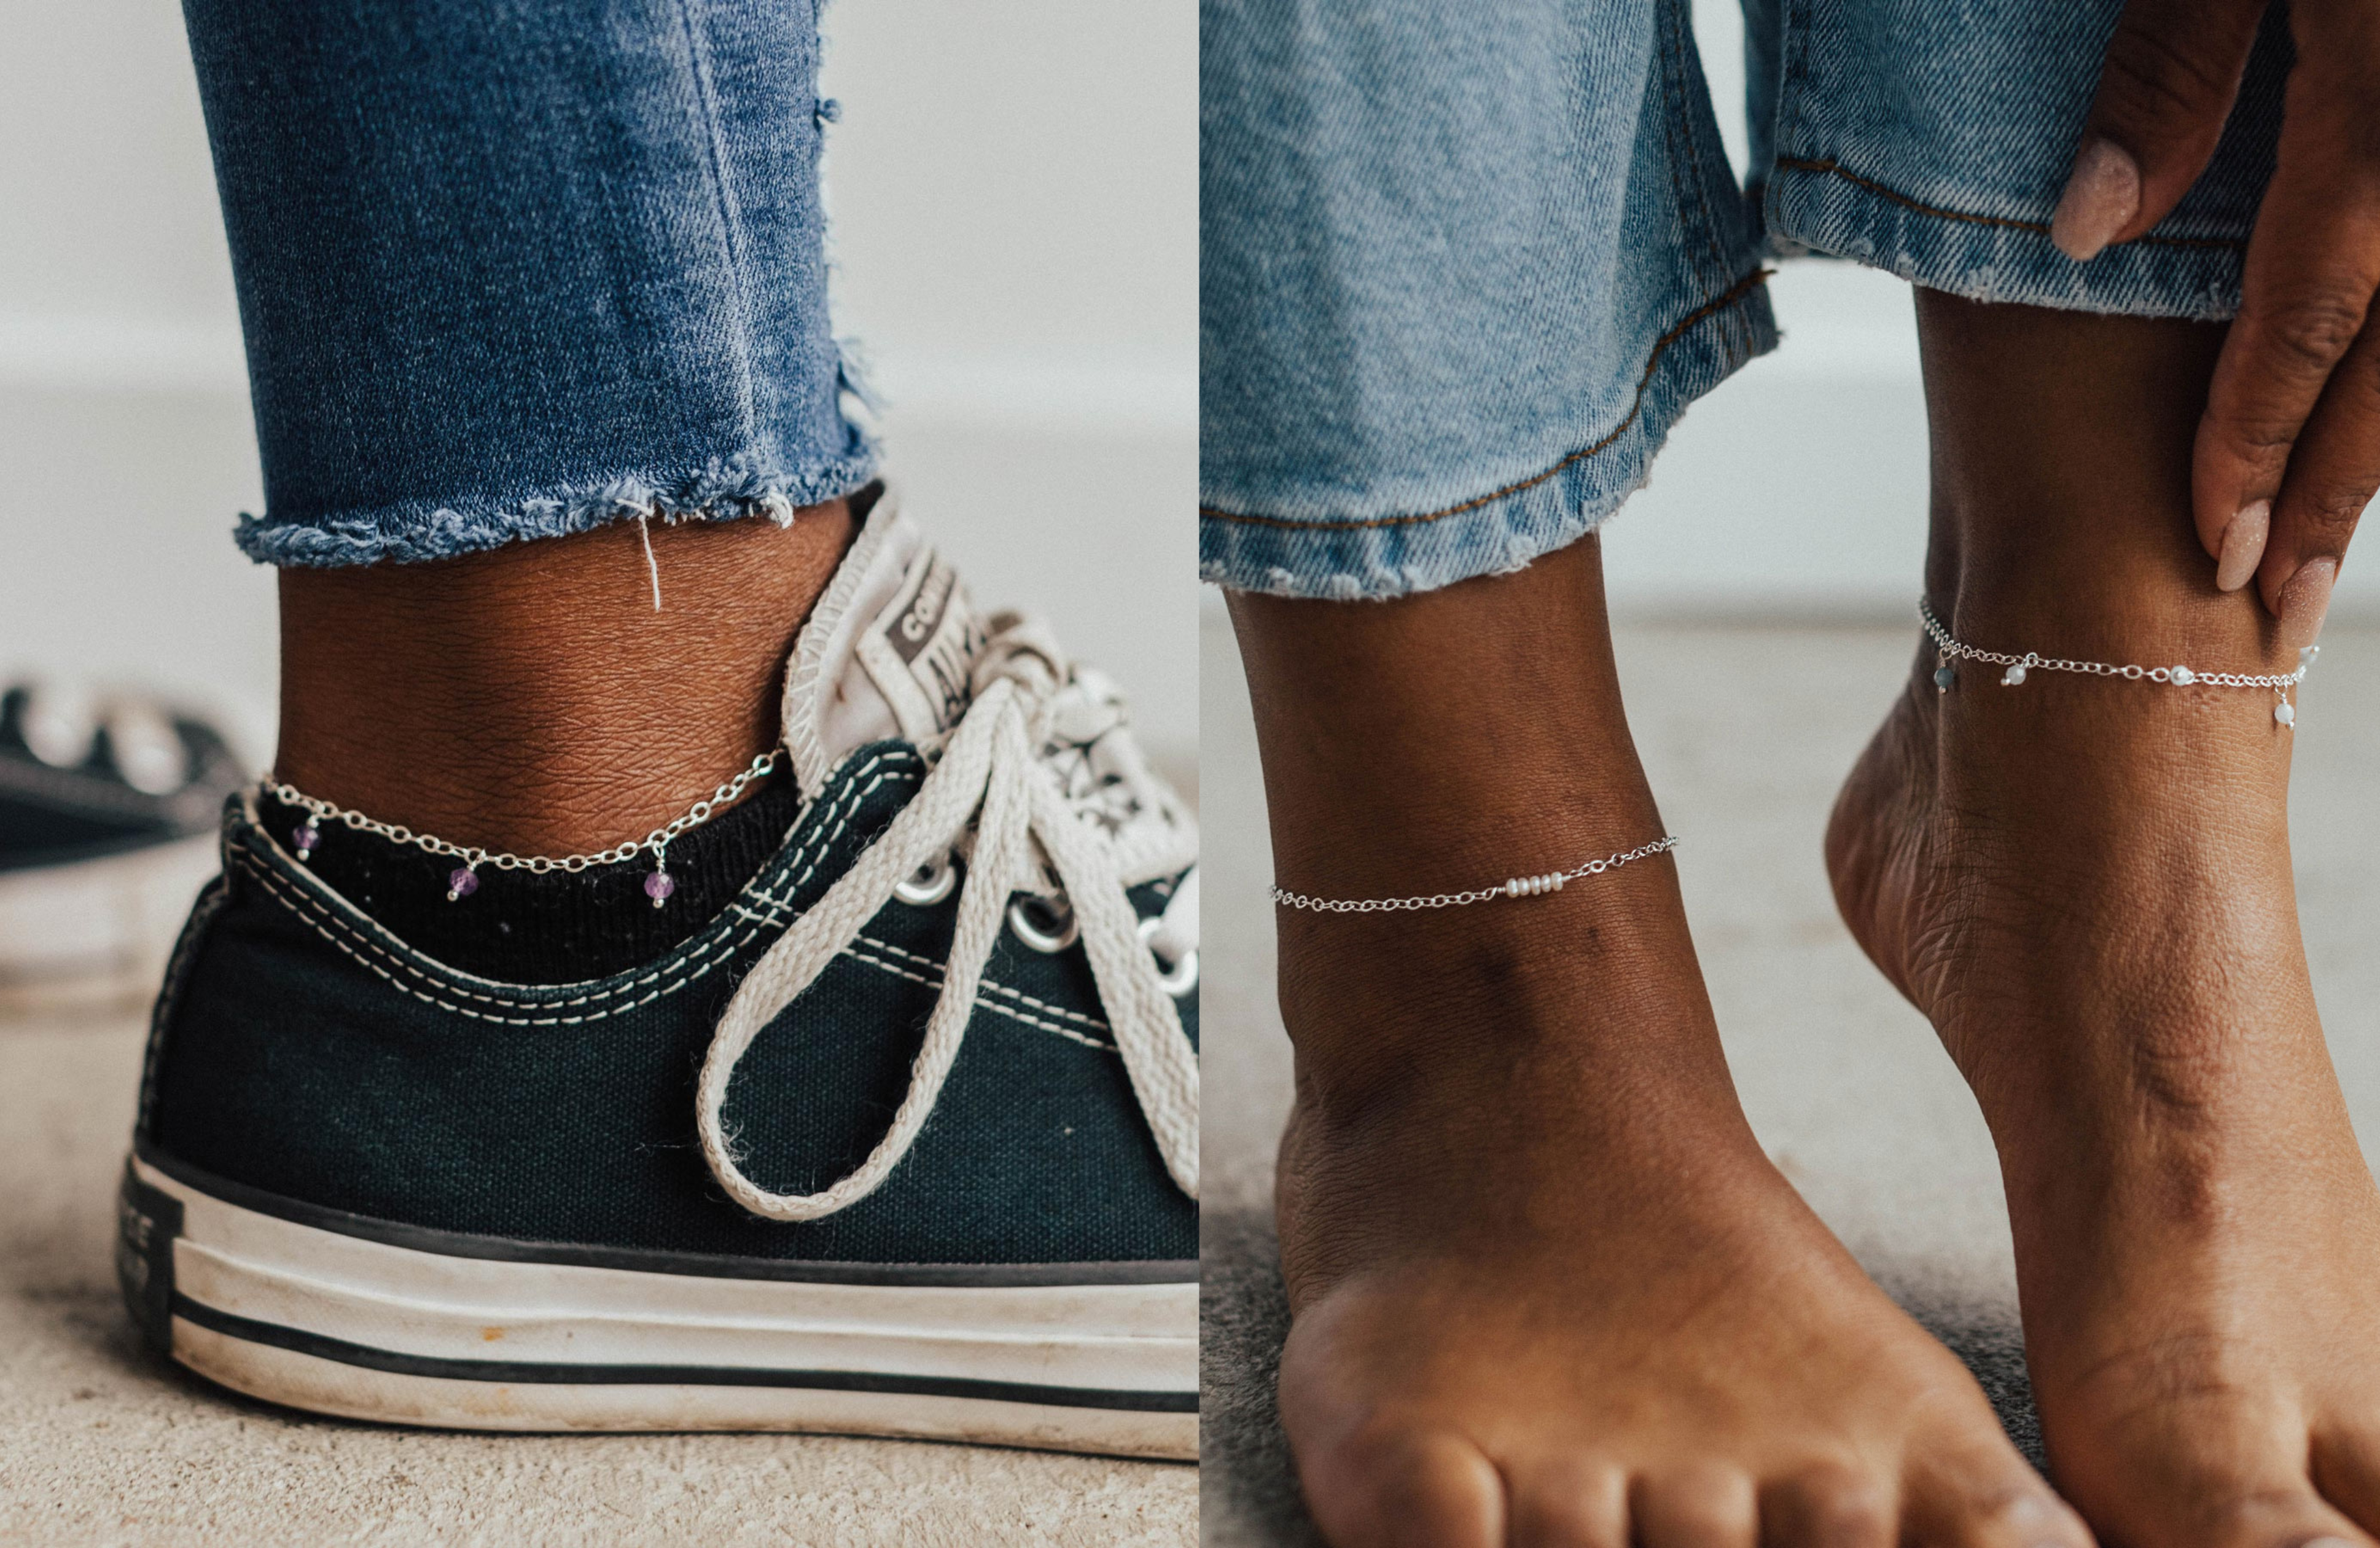 How to wear anklets